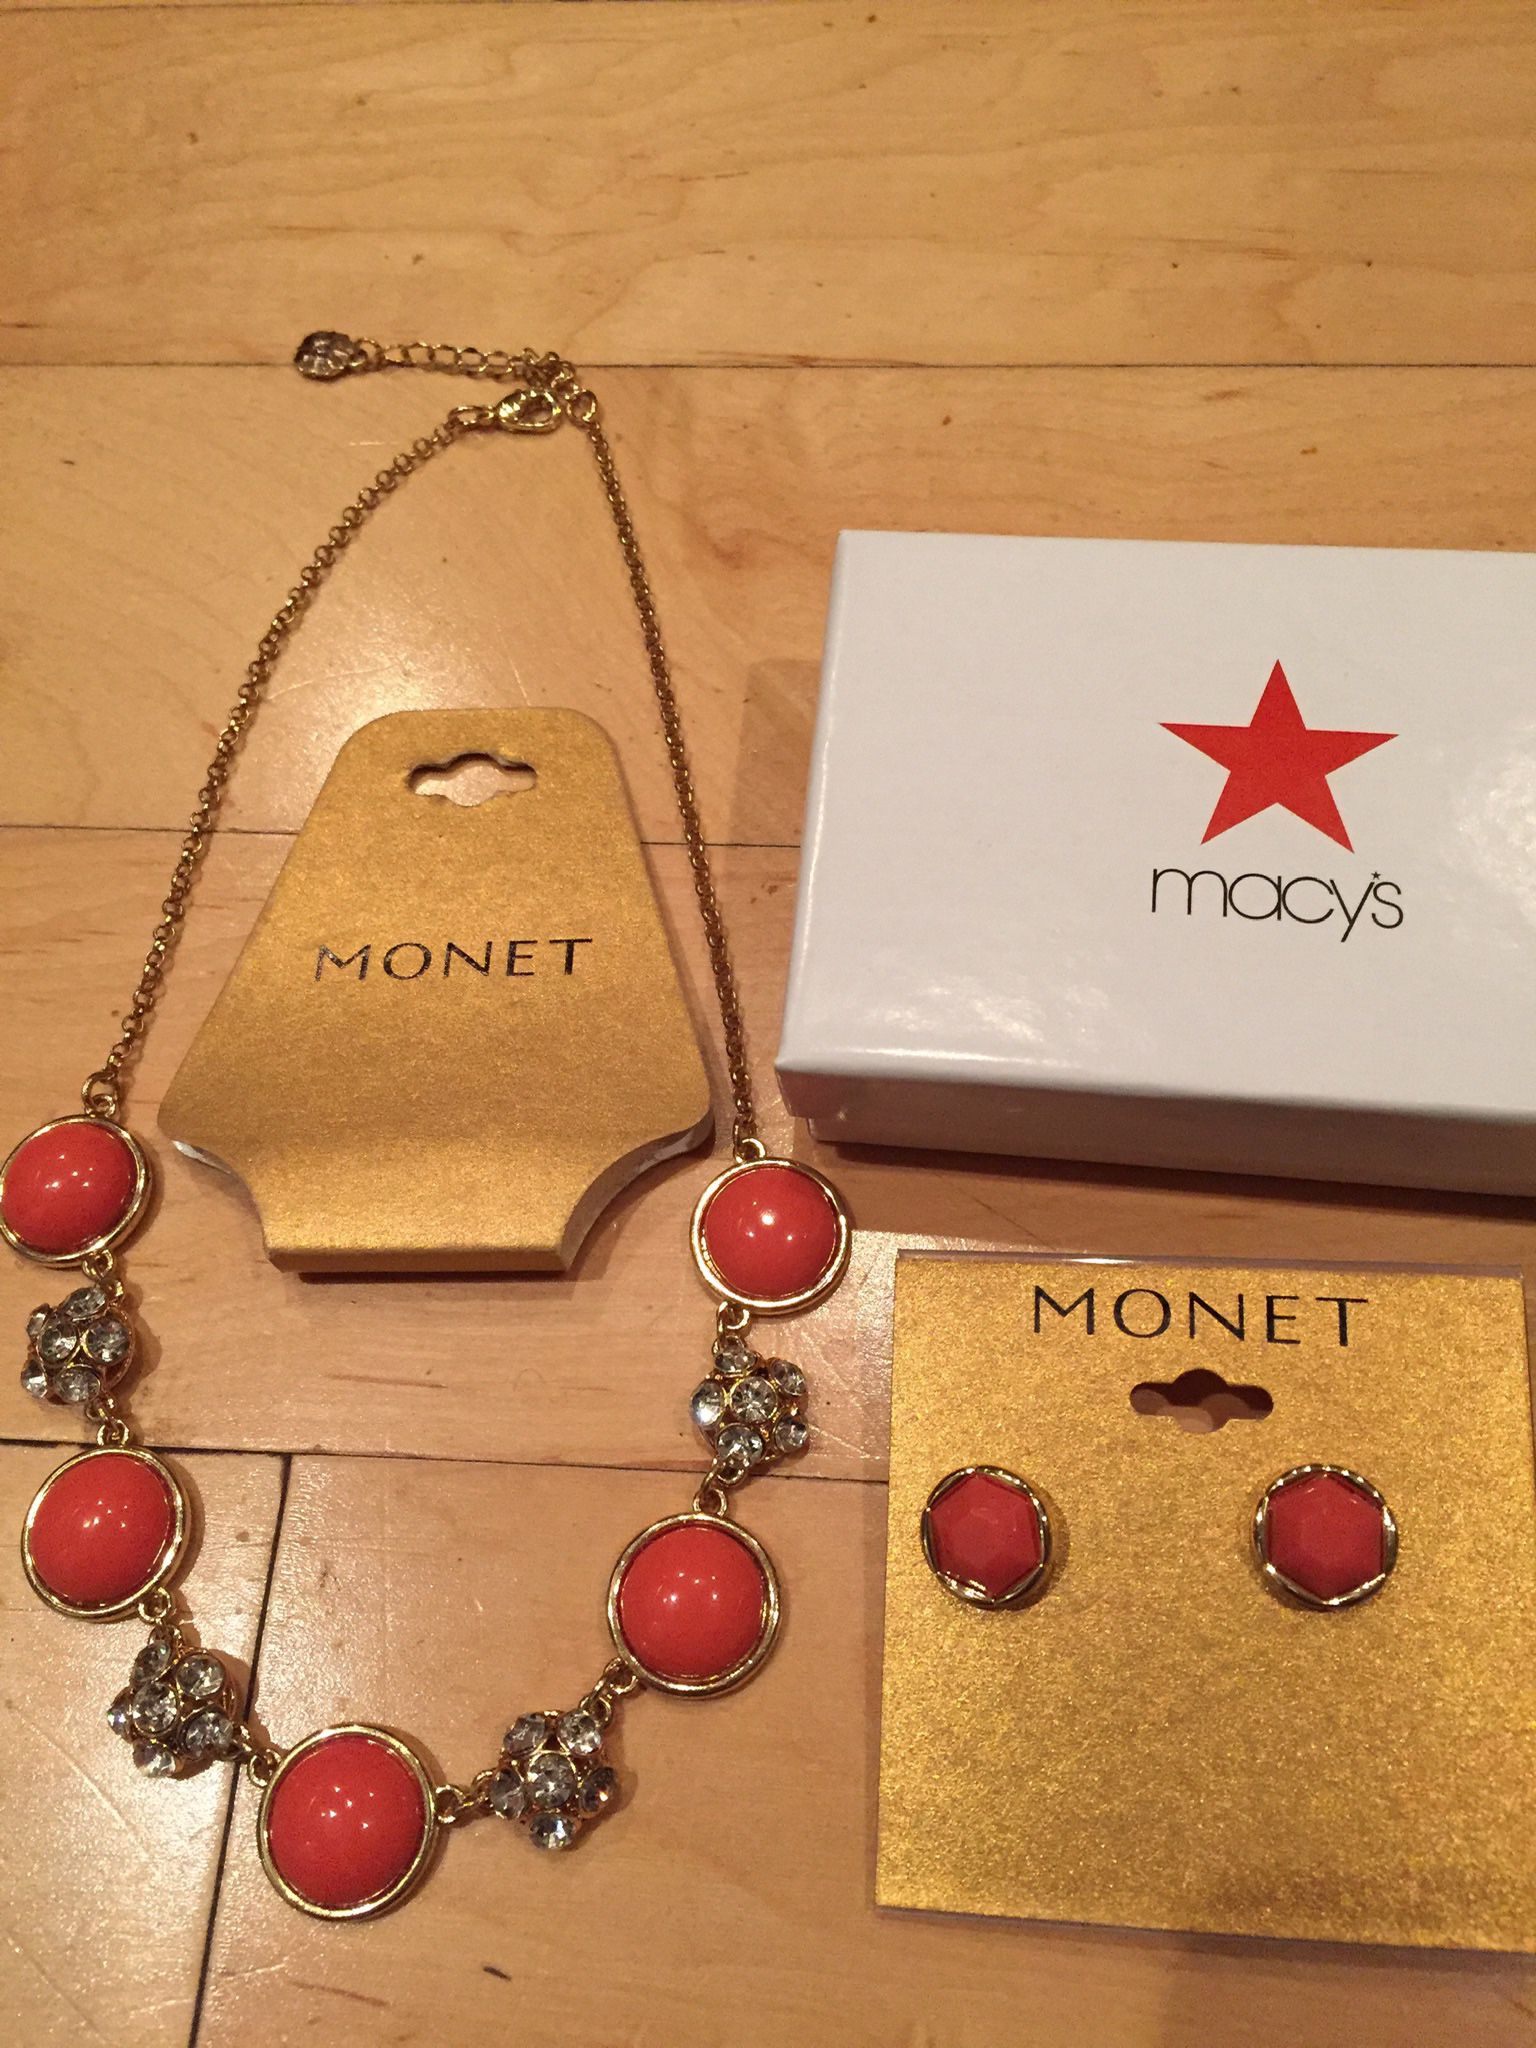 MONET NECKLACE AND EARRINGS NEW 